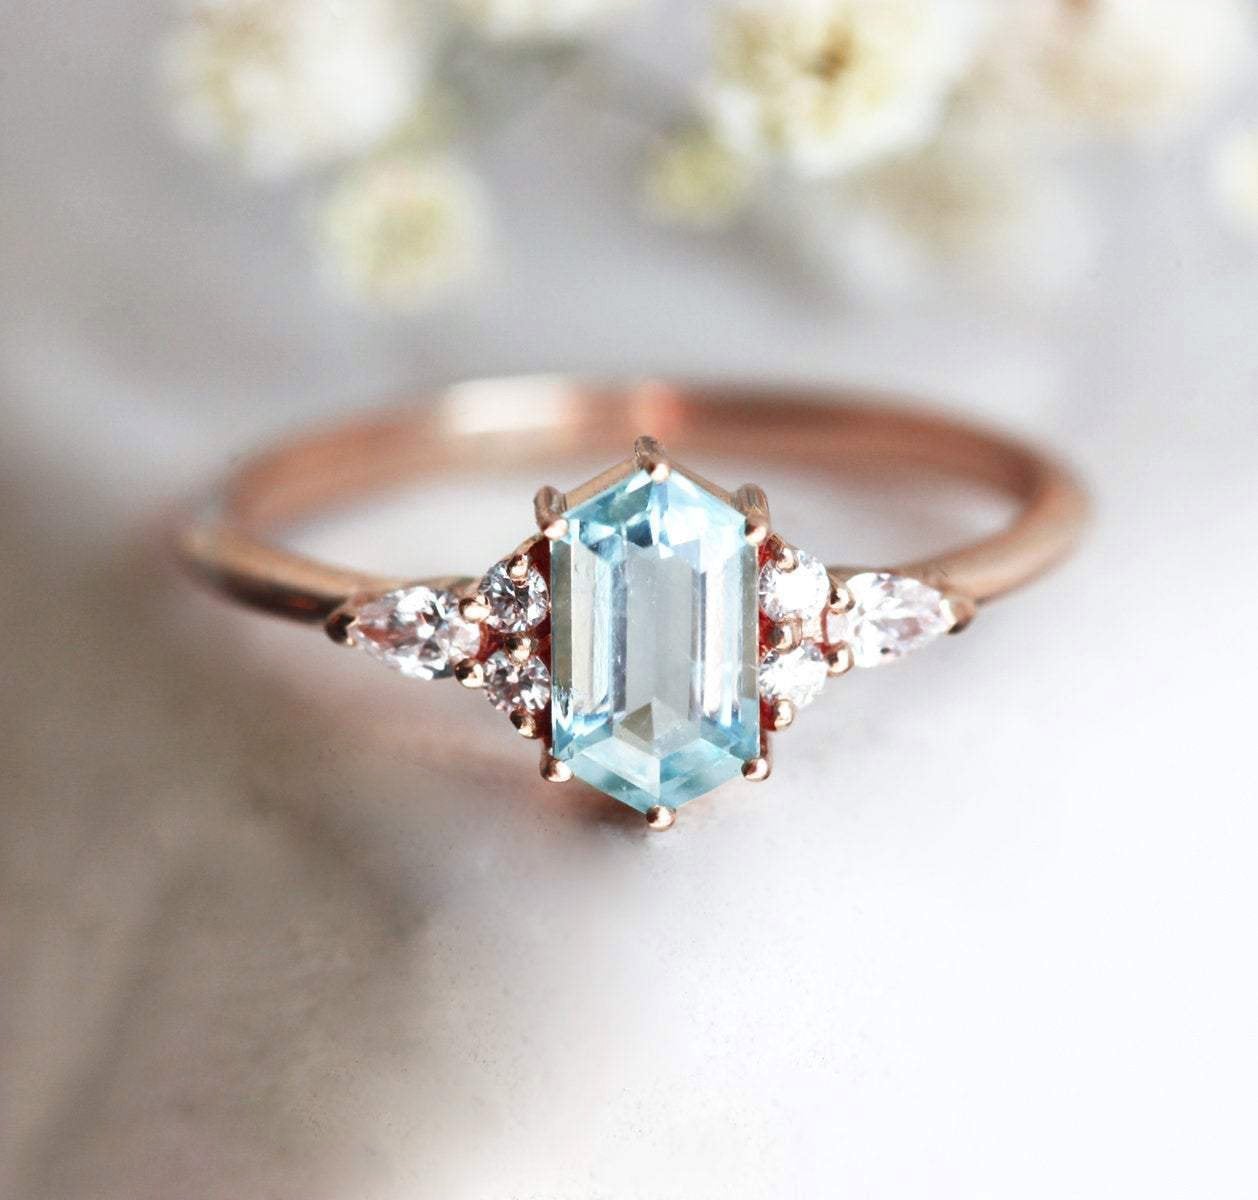 Blue Hexagon Aquamarine Ring with Side Round and Pear White Diamonds